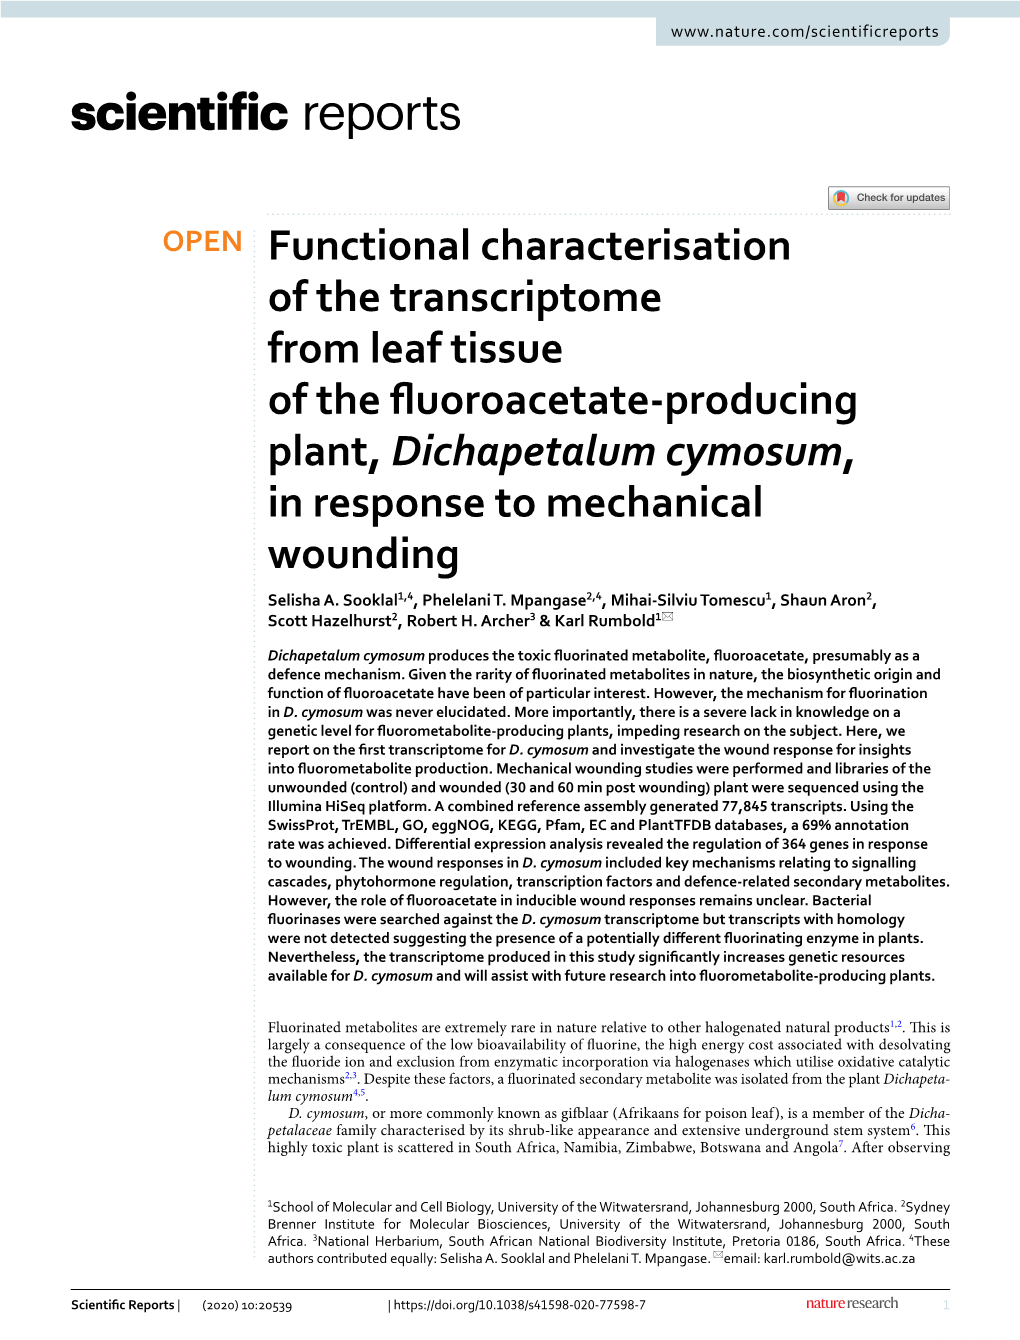 Functional Characterisation of the Transcriptome from Leaf Tissue of The